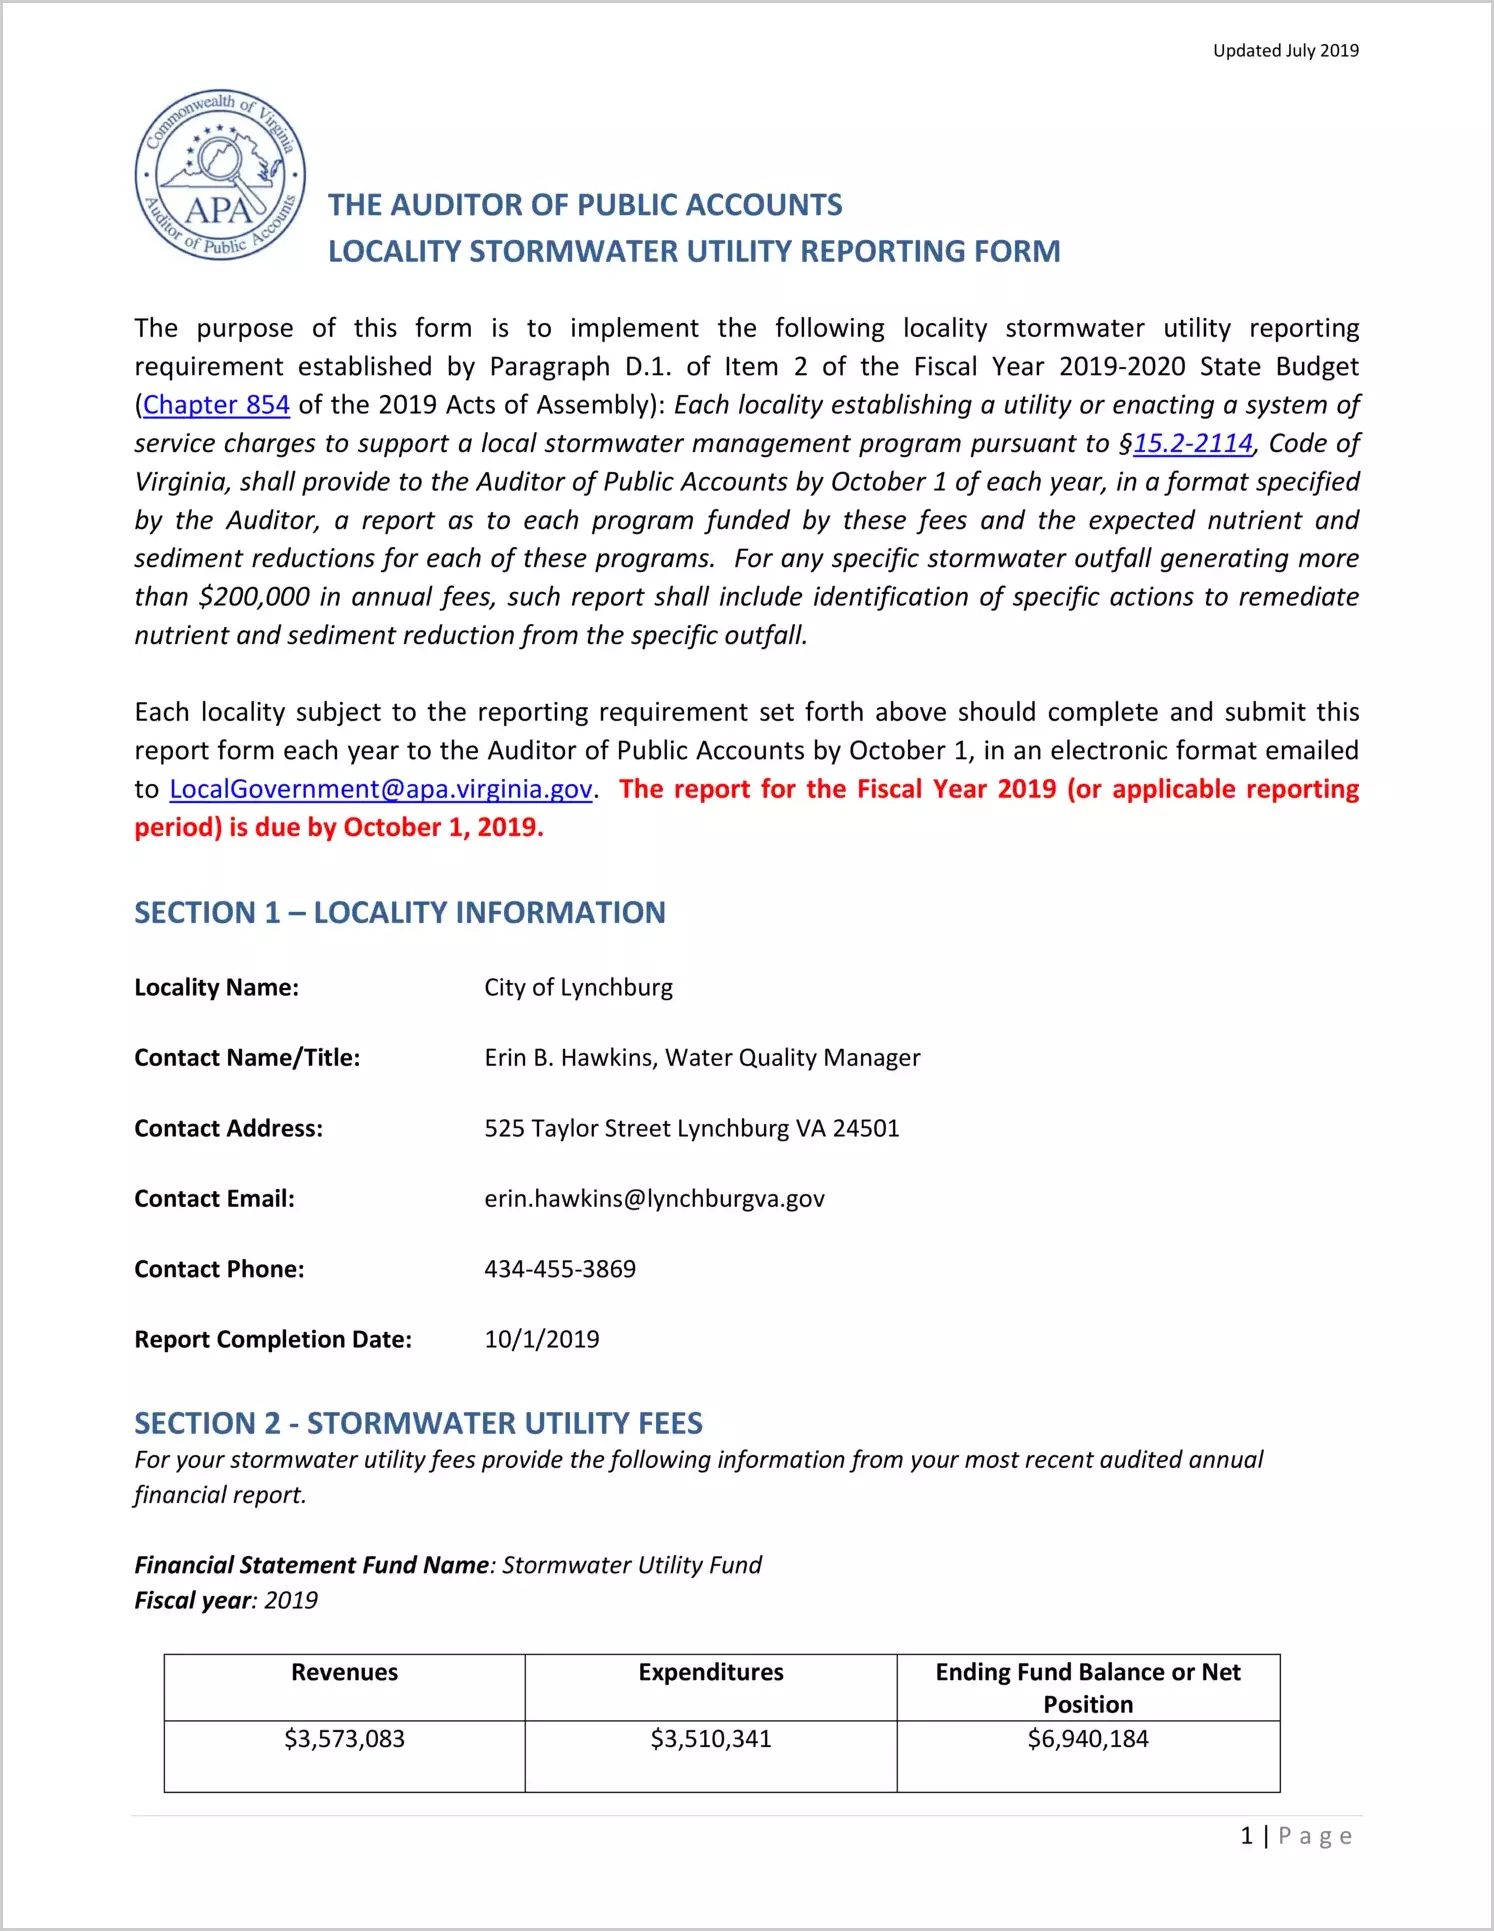 2019 Stormwater Utility Report for City of Lynchburg